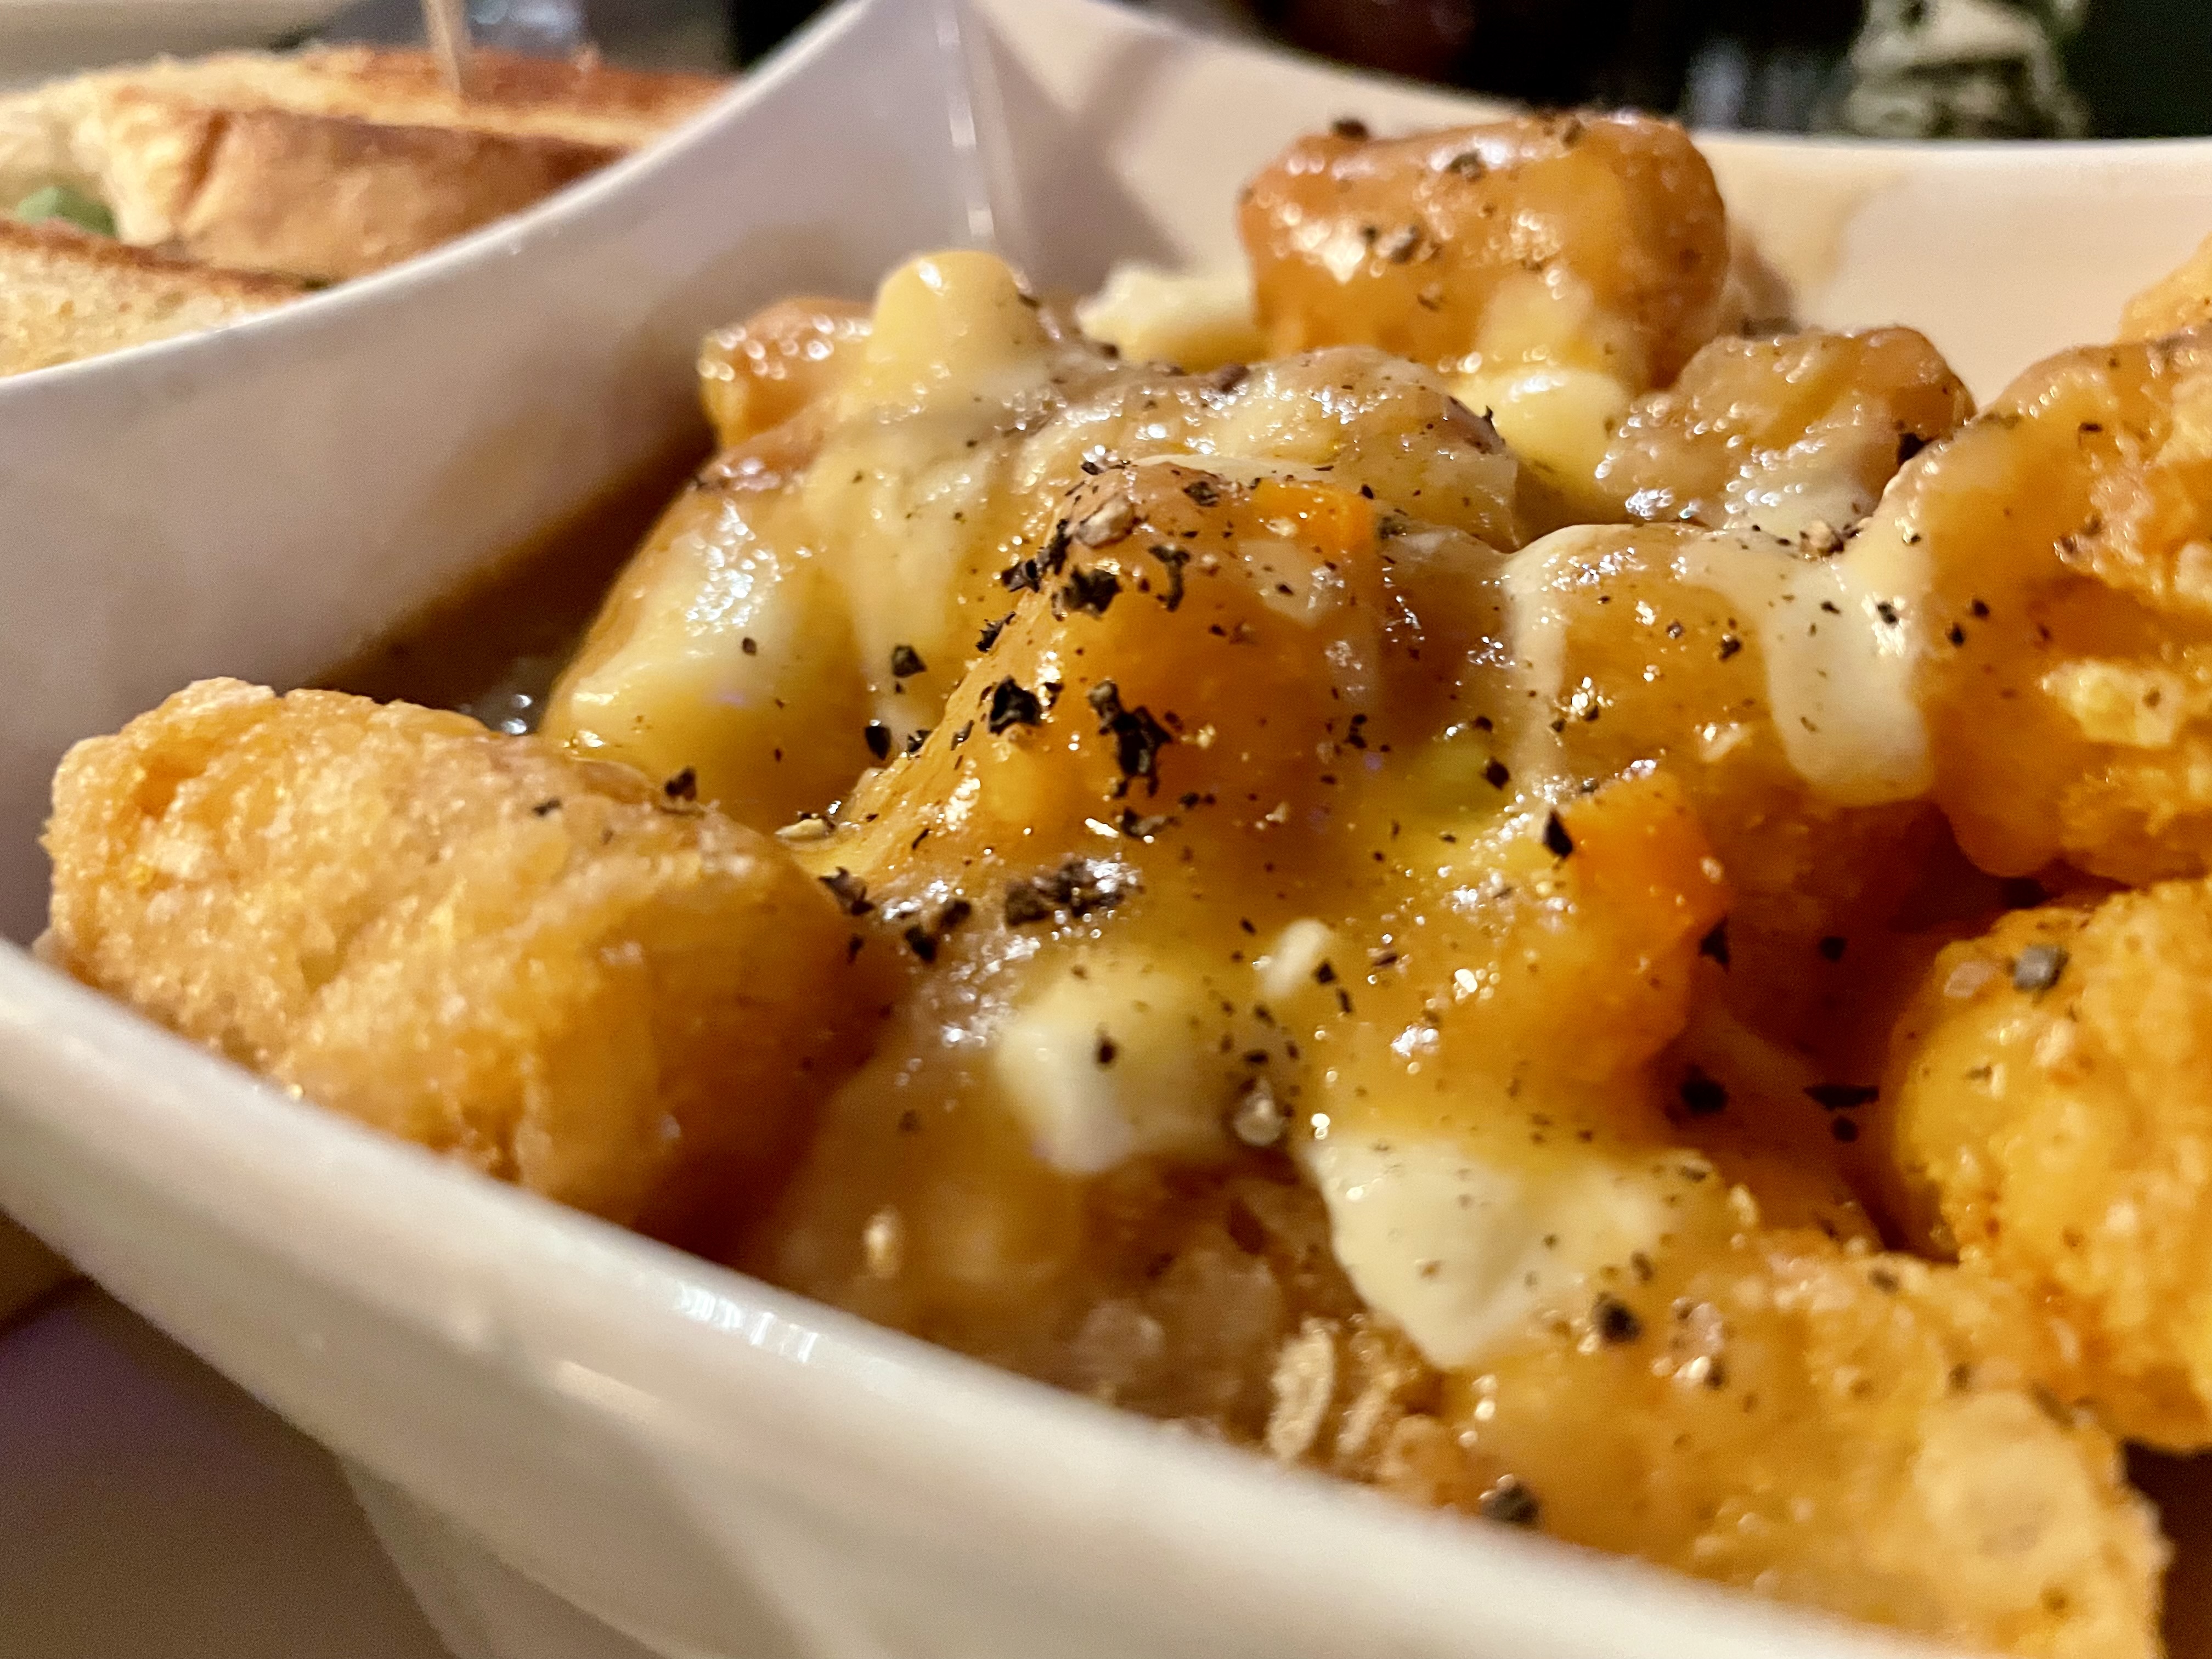 We loved a sprinkling of black pepper on our tater-tot poutine—a side we've been craving since we tried it at Bowman's